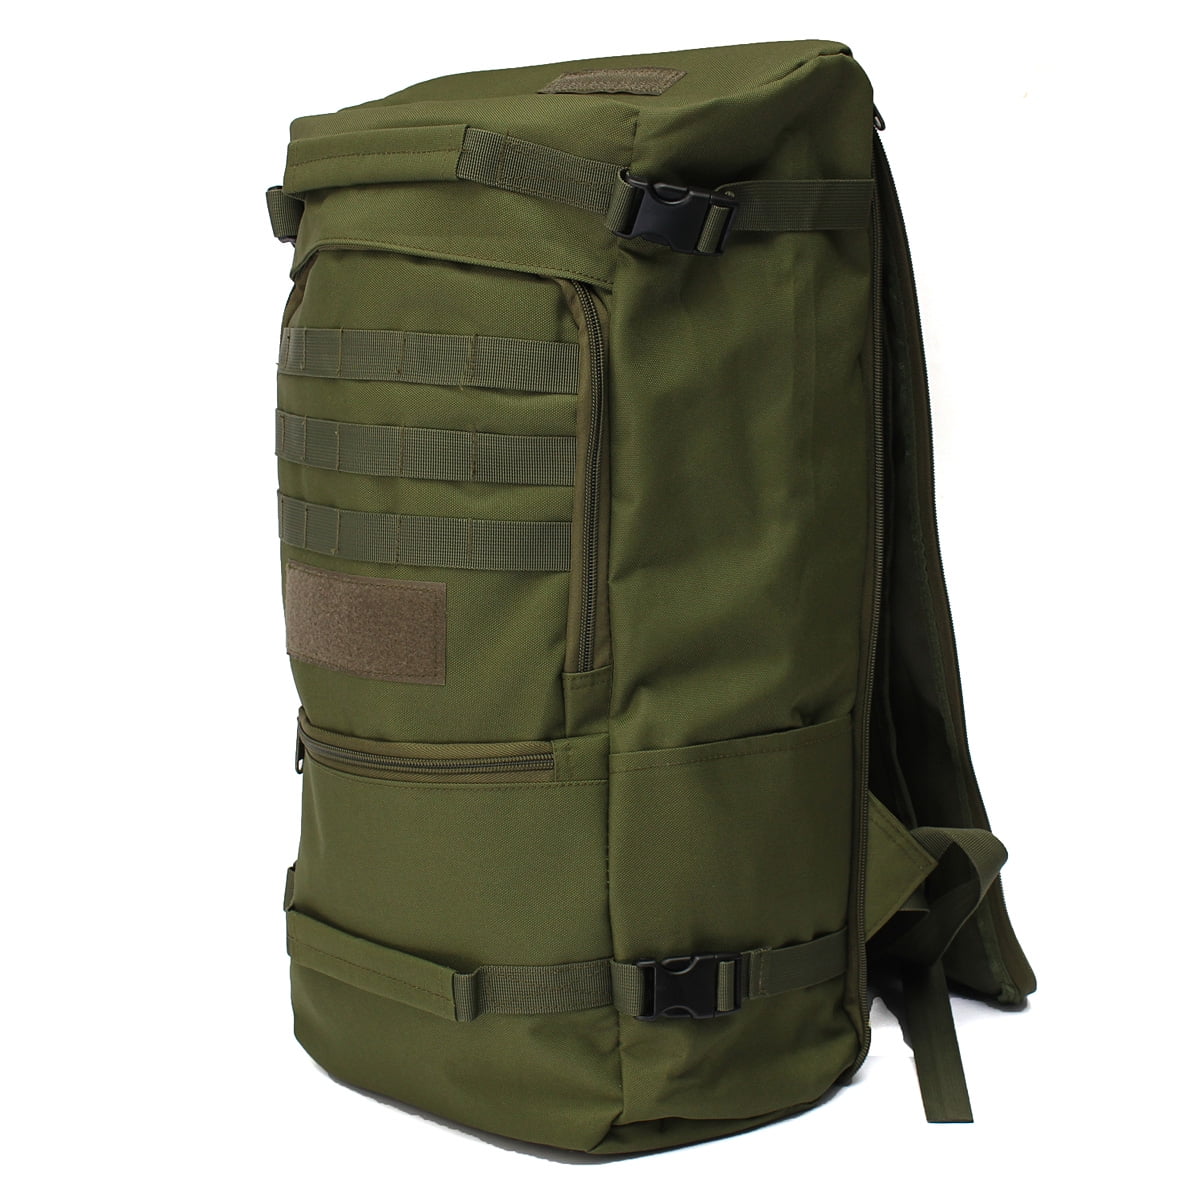 New Style Tactical Pack Sport Backpack Bag Camping Travel Bag Military Day Packs